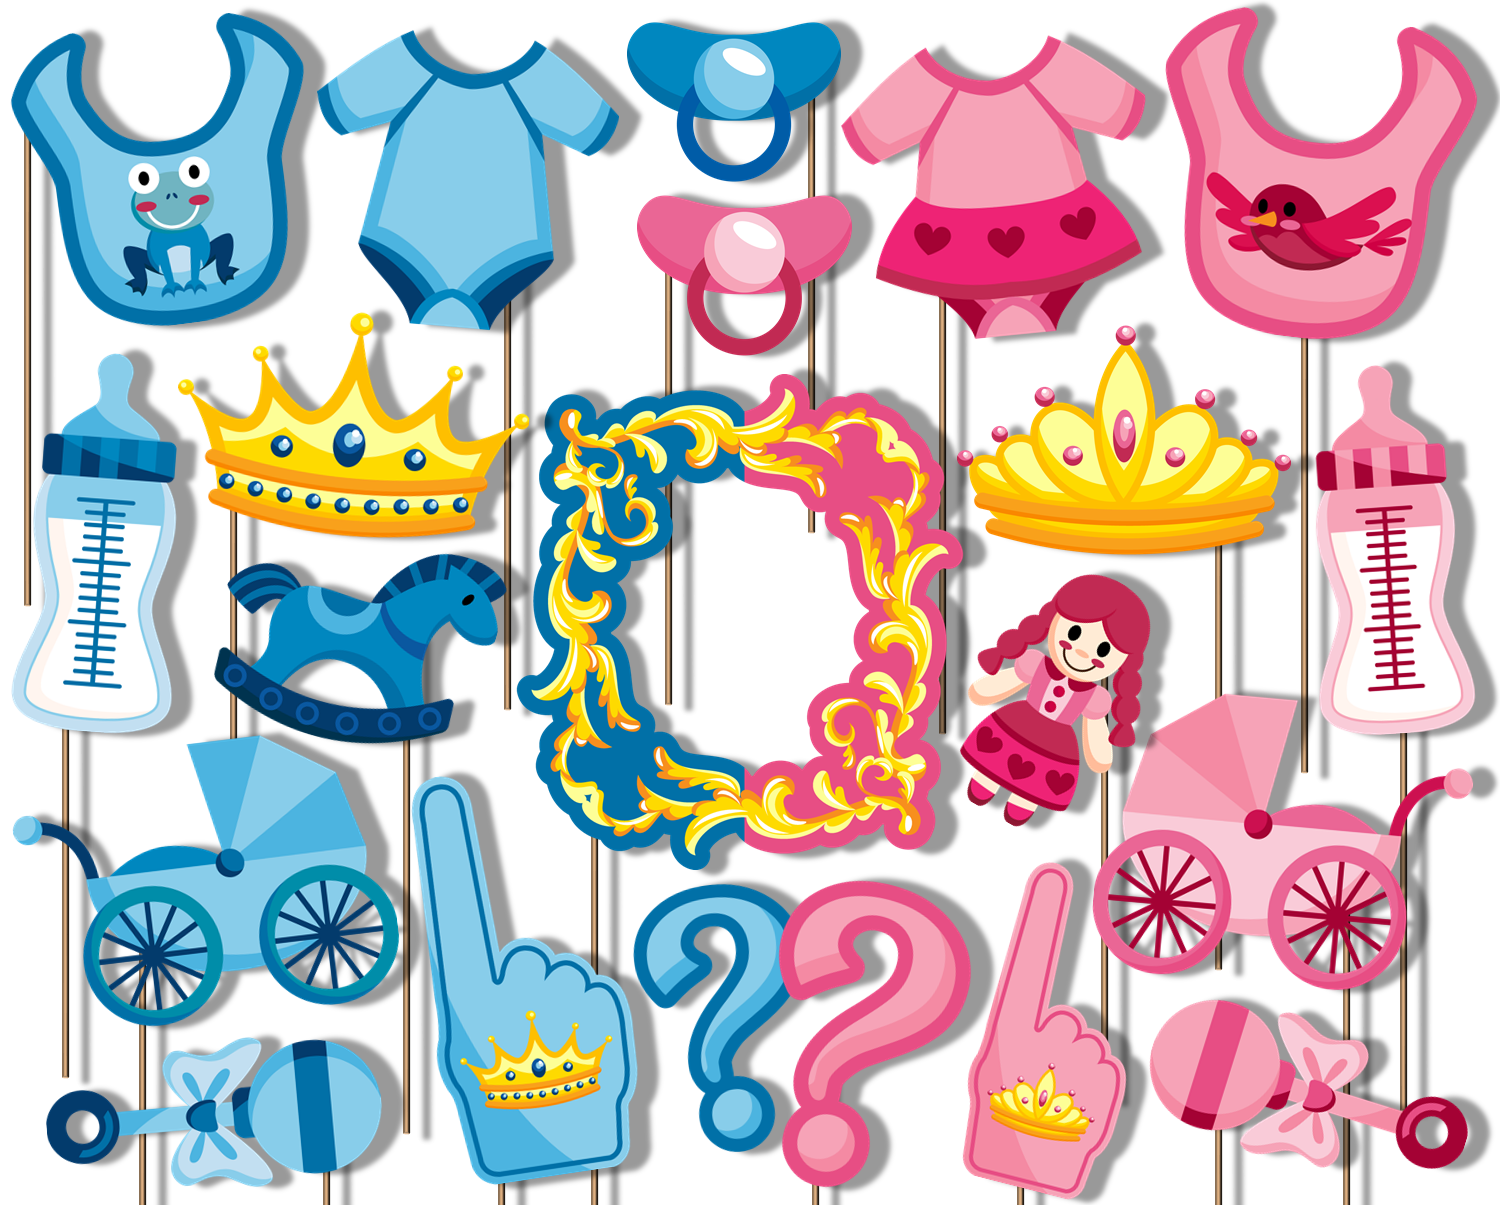 Prince or Princess Gender Reveal Photo Booth Props 20pcs Assembled - BirthdayGalore.com